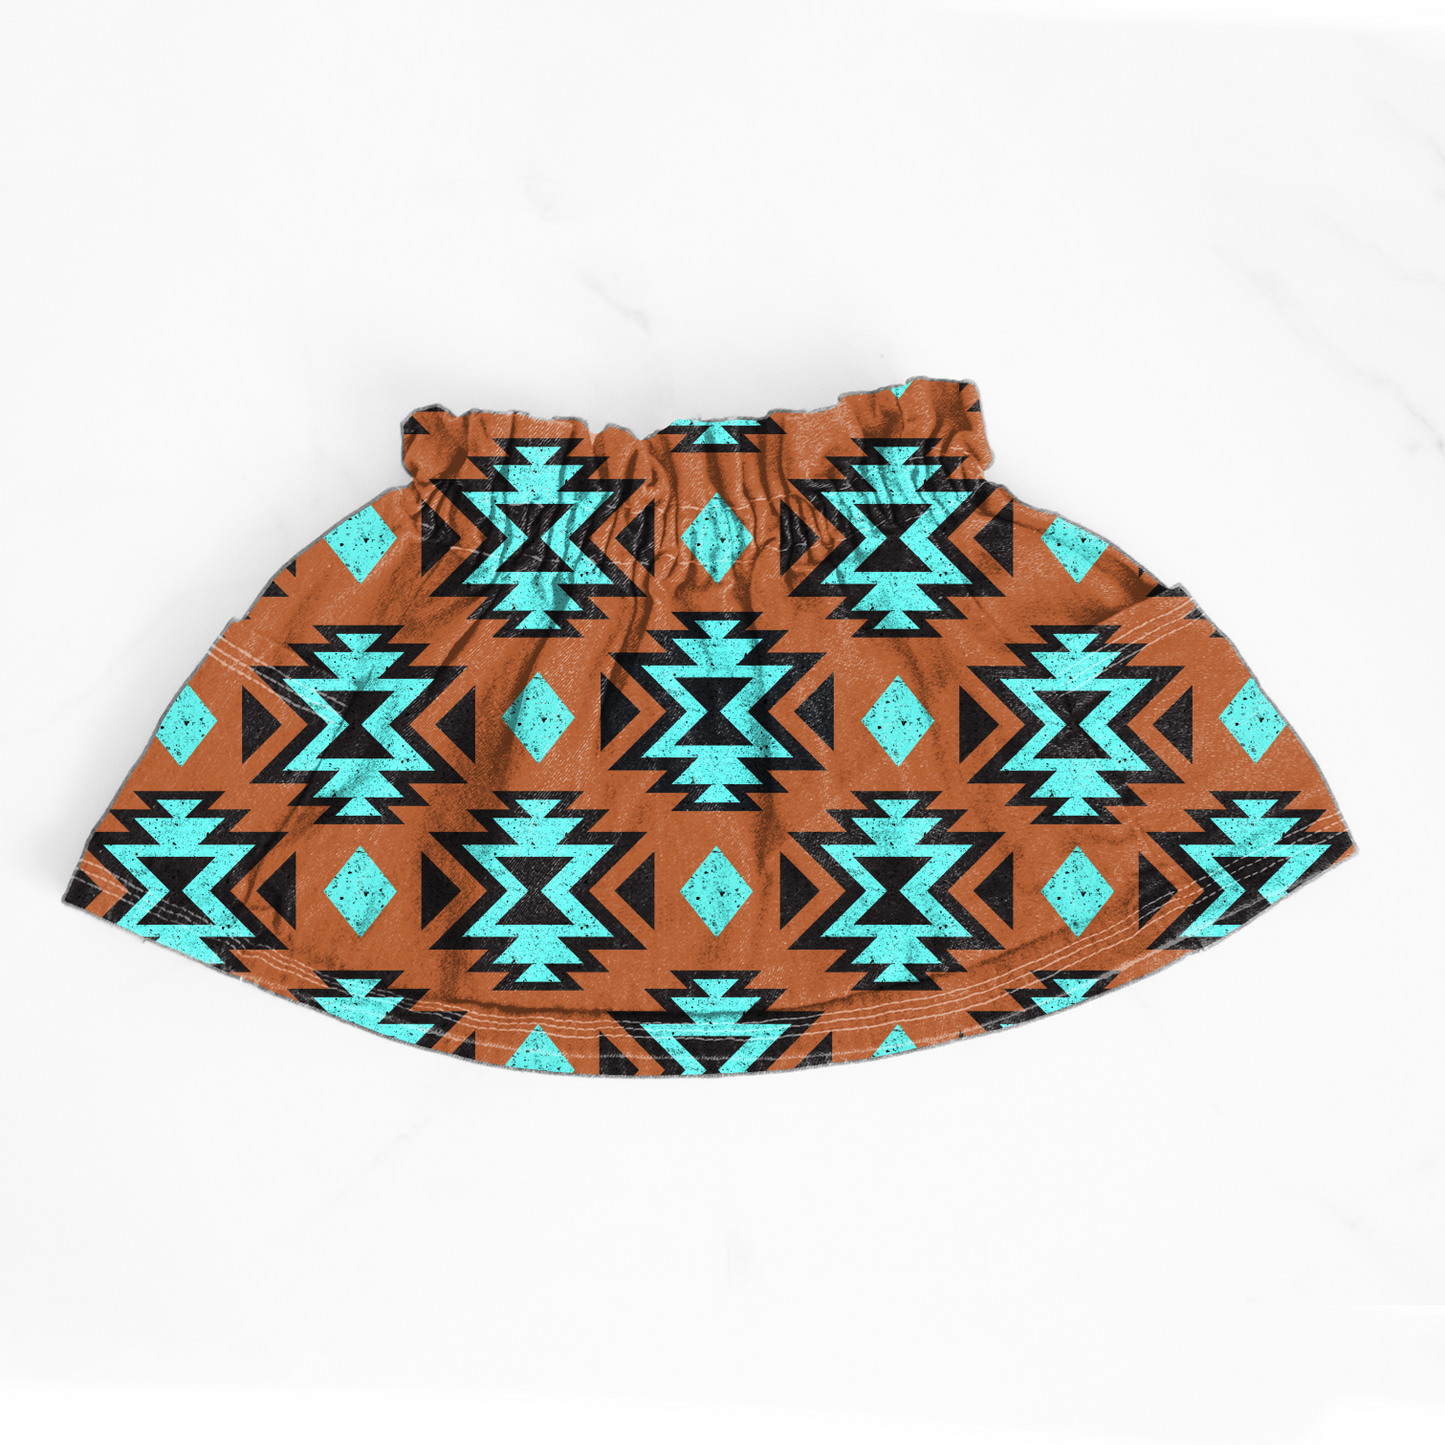 Steerhead Paper Bag Waist Skirt - 3 Prints To Choose From (RTS)